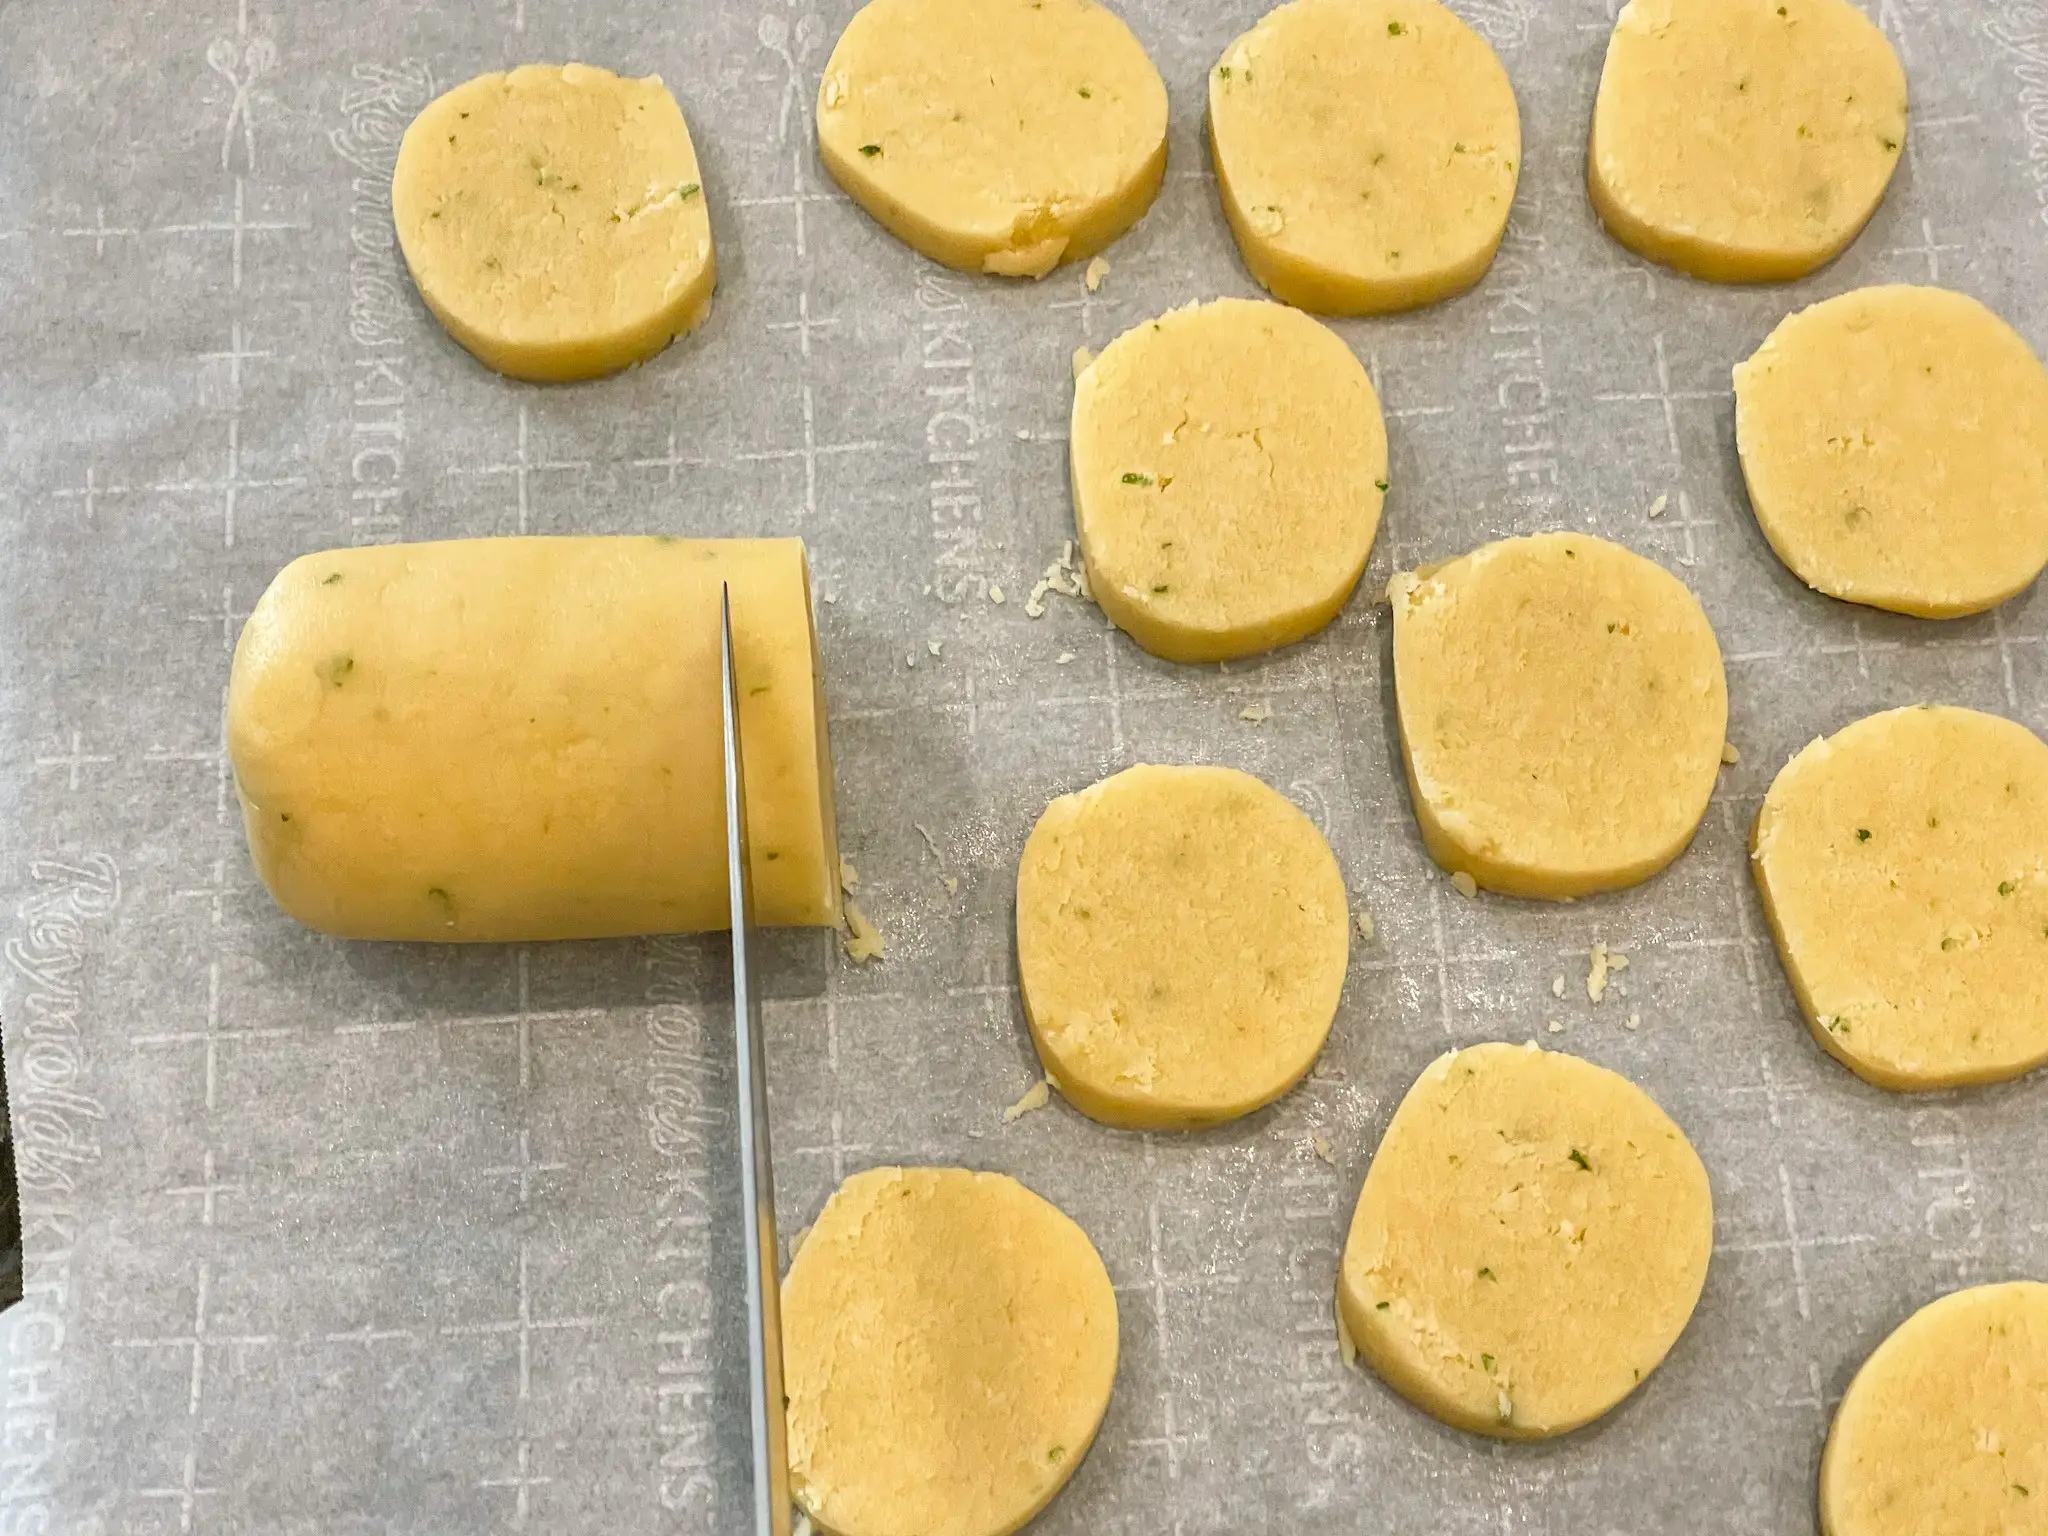 Slicing 1/2 inch cookies.